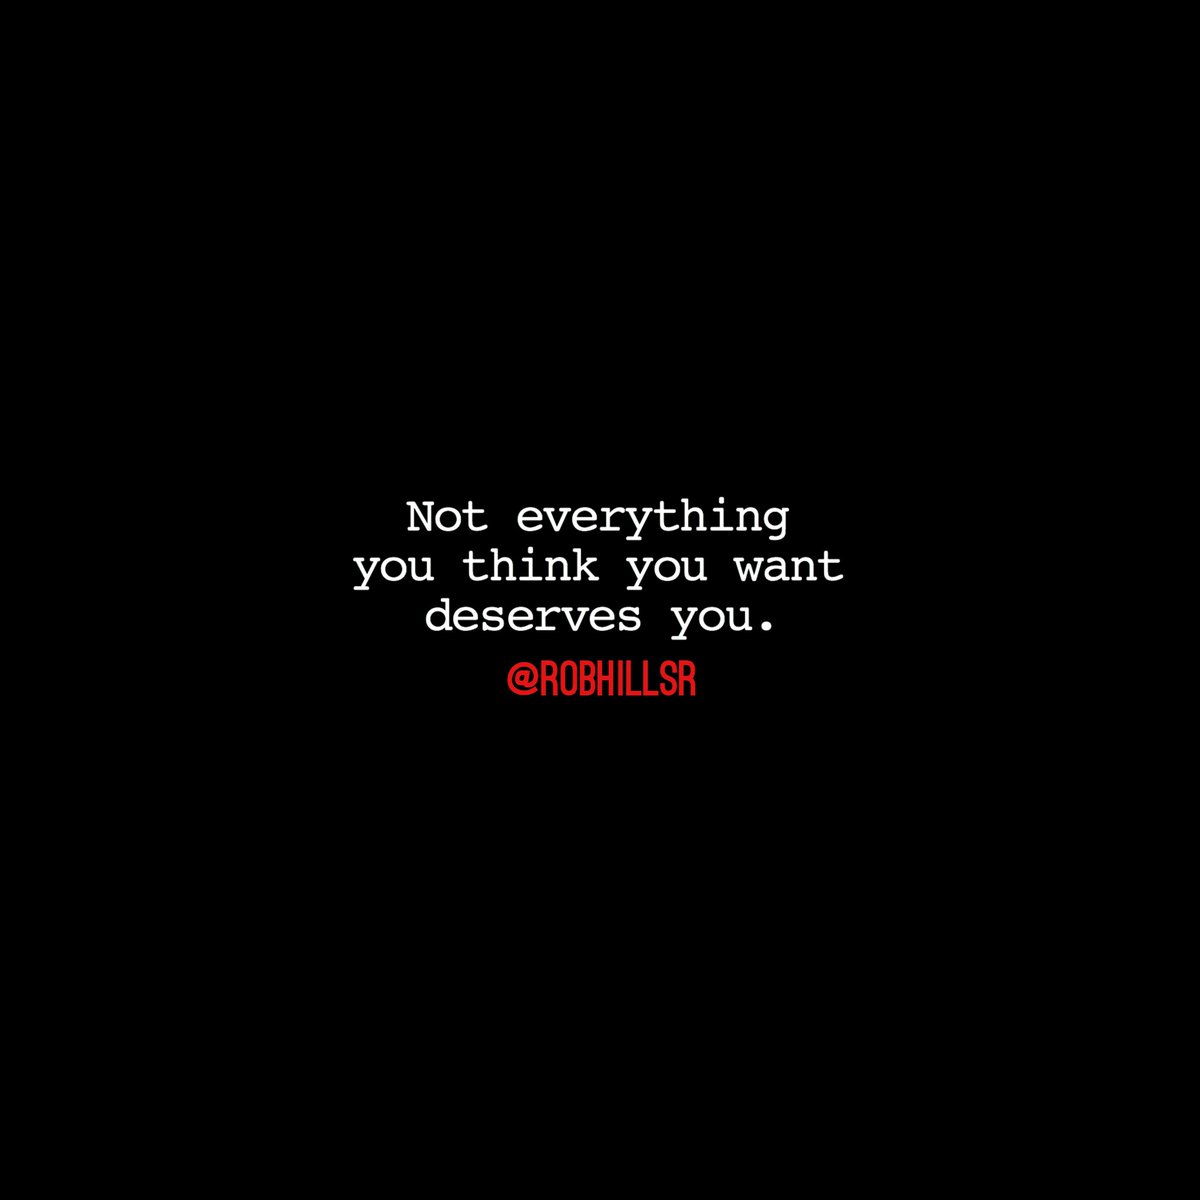 RT @RobHillSr: Not everything you think you want deserves you… https://t.co/6LBCyGXXyC